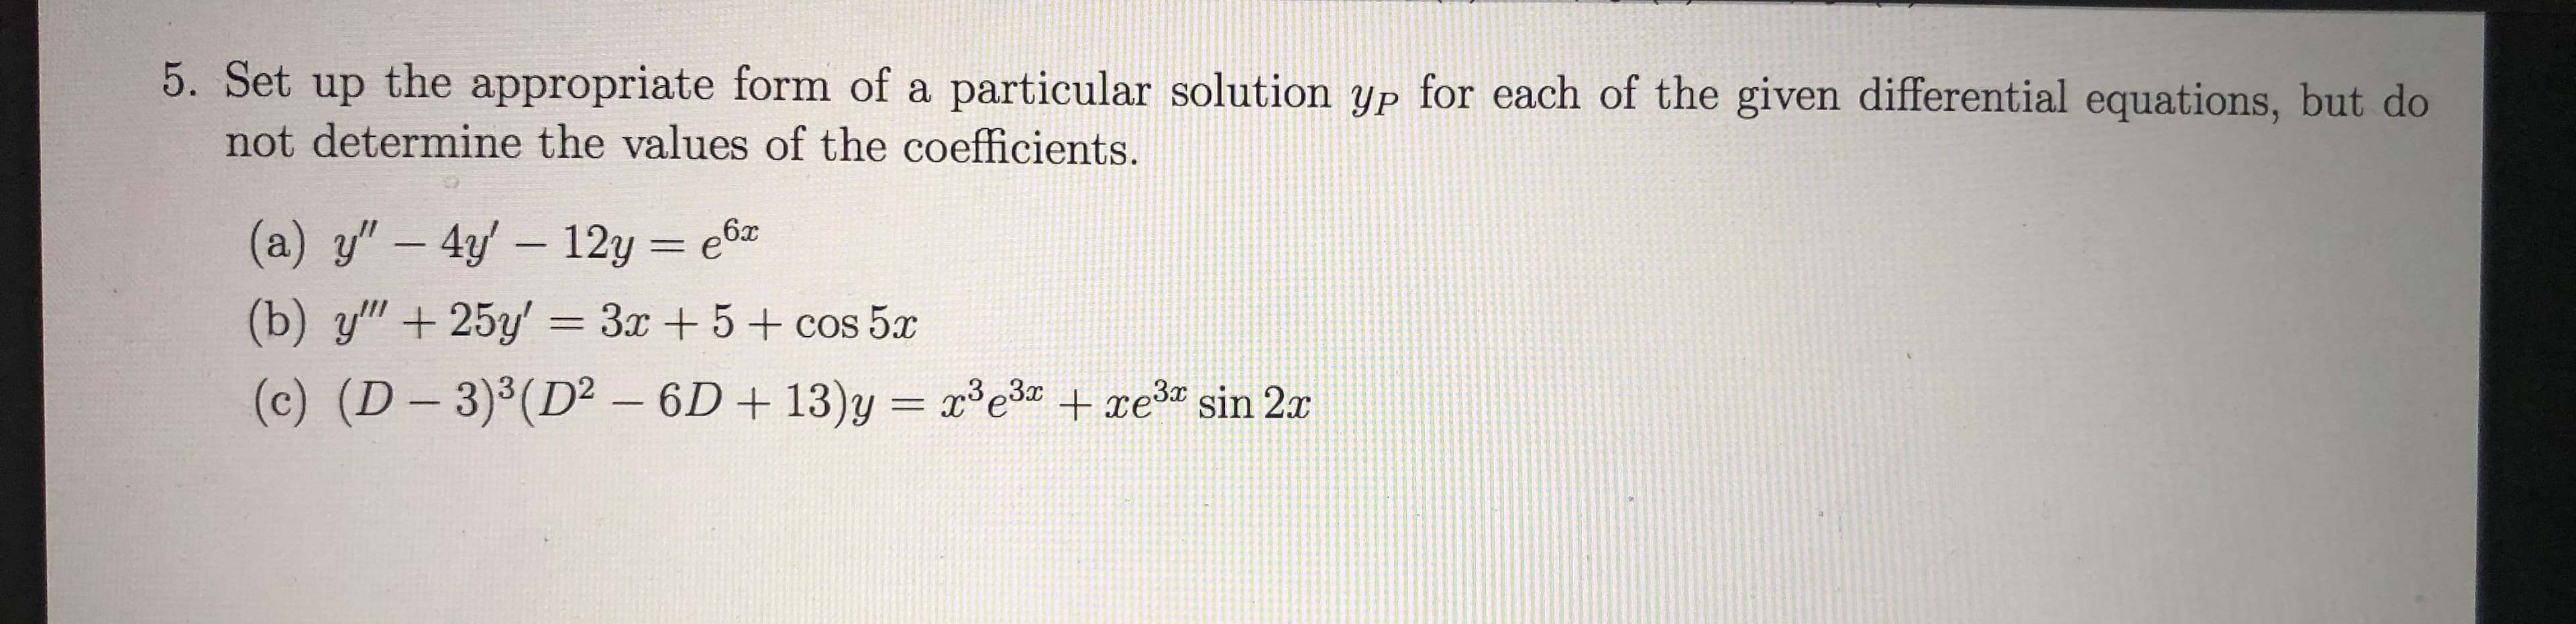 5. Set up the appropriate form of a particular solution yP for each of the given differential equations, but do
not determine the values of the coefficients.
6x
(a) y" 4y 12y e
(b) y"+25y' 3r +5+cos 5
(c) (D-3)3 (D2 6D+ 13)y re +re3 sin 2
